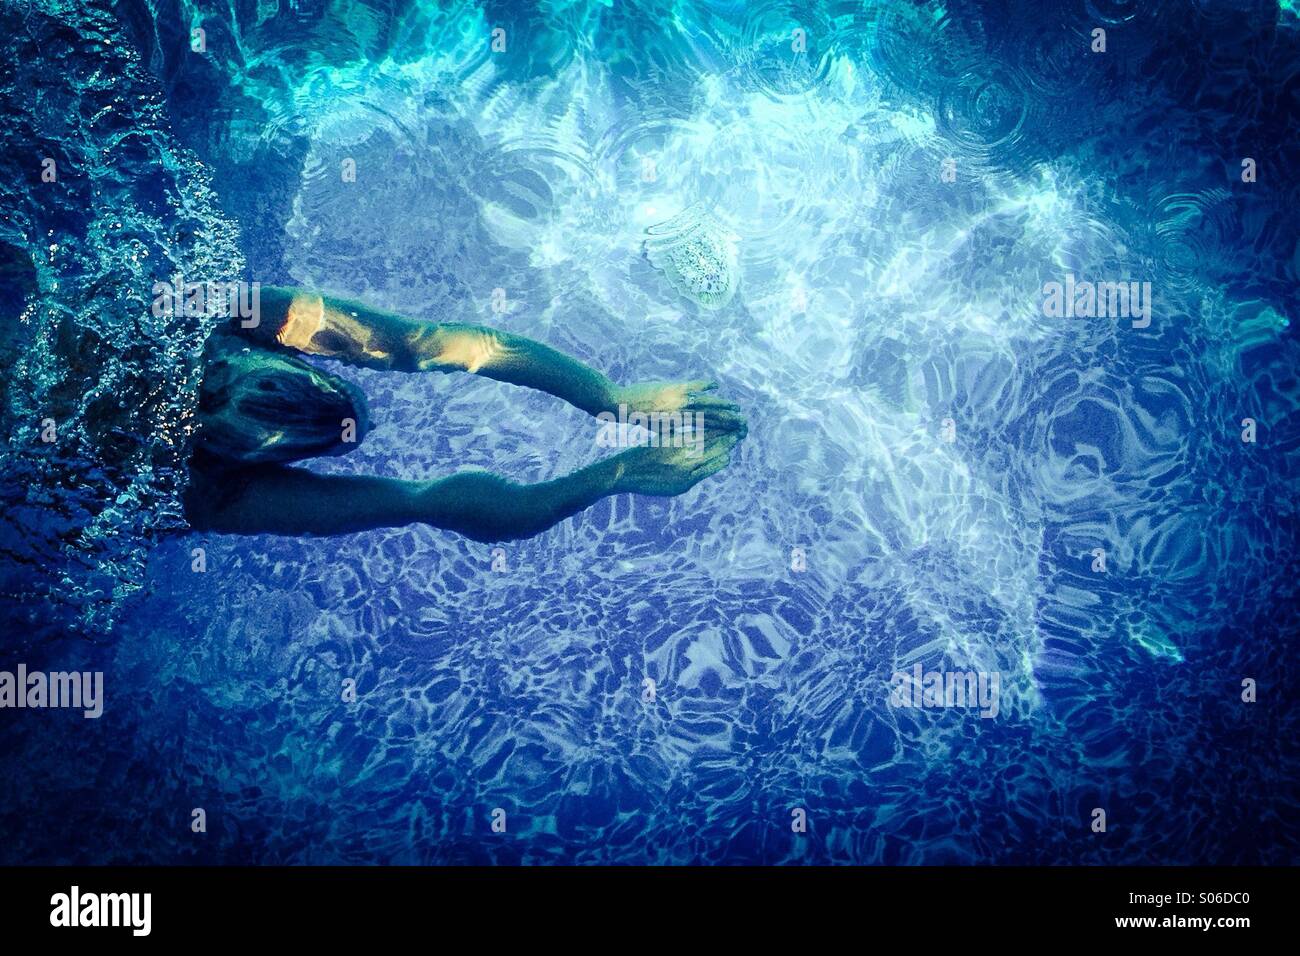 Woman swimming in pool, under water. Stock Photo